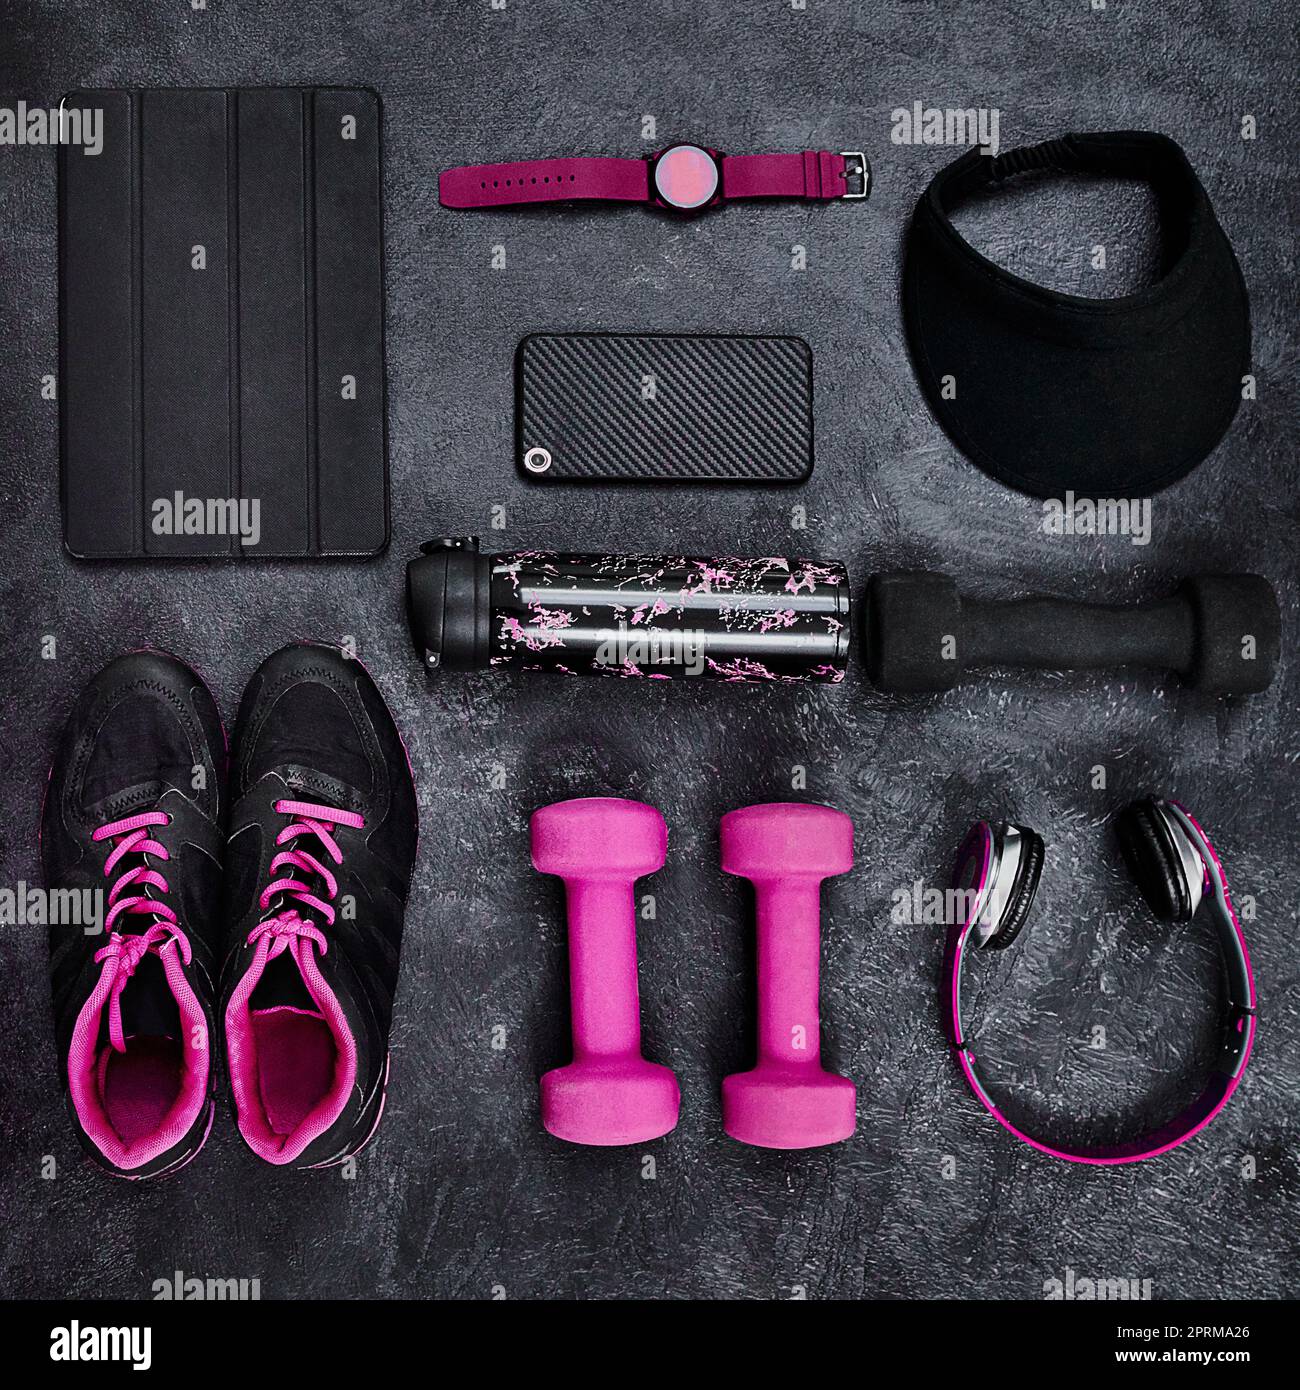 https://c8.alamy.com/comp/2PRMA26/i-think-i-came-prepared-high-angle-shot-of-a-group-of-workout-essentials-lying-on-top-of-a-dark-background-inside-of-a-studio-2PRMA26.jpg